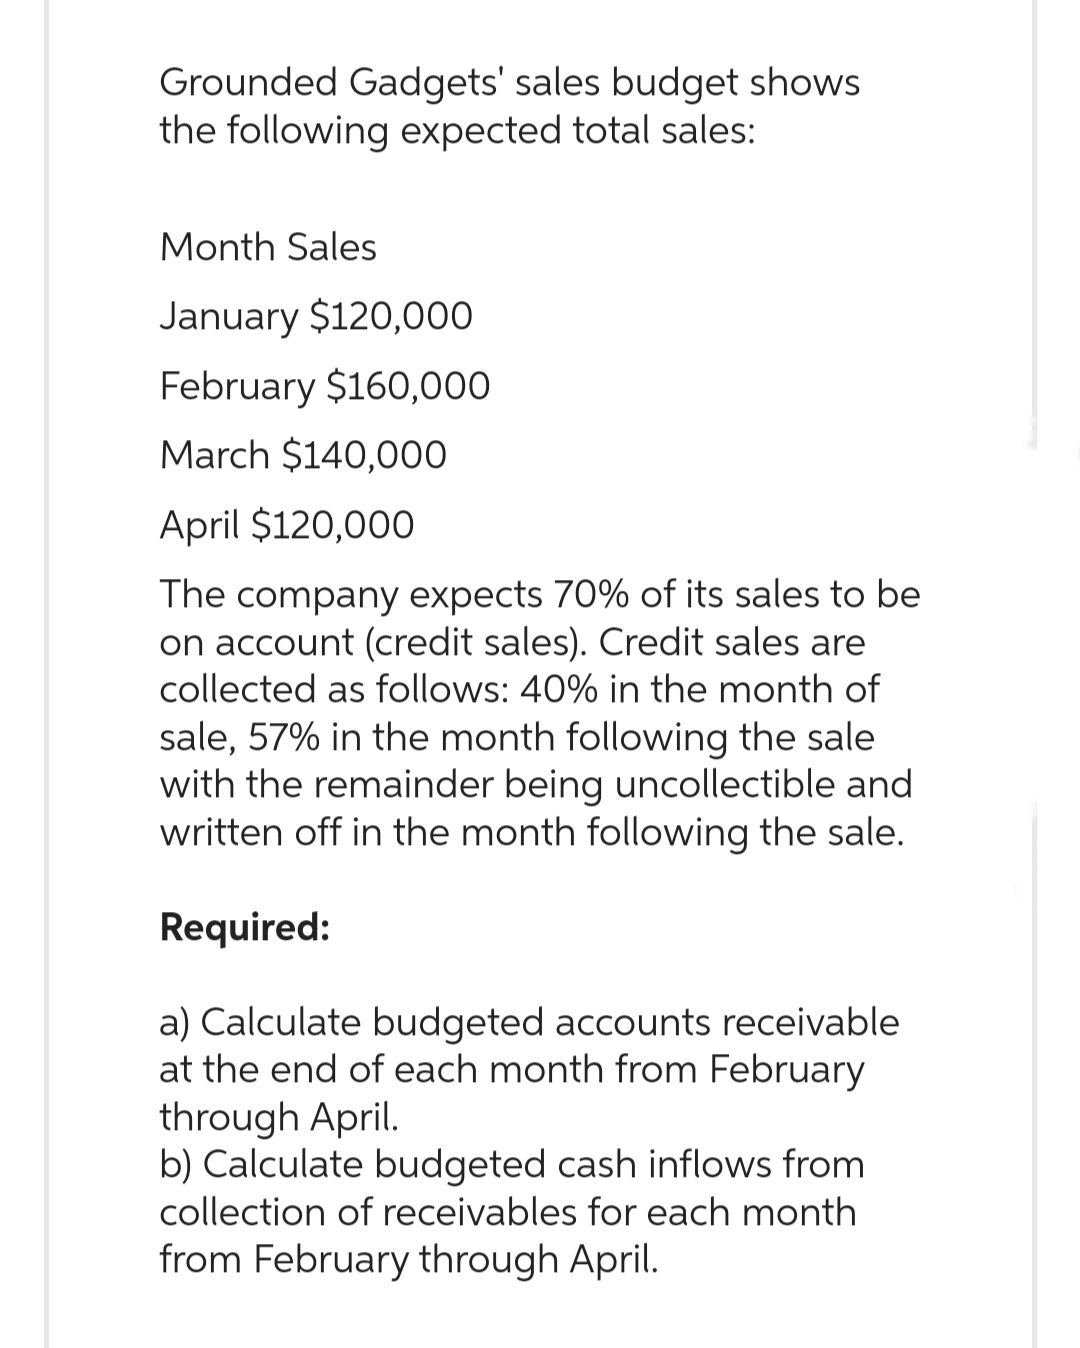 Grounded Gadgets' sales budget shows
the following expected total sales:
Month Sales
January $120,000
February $160,000
March $140,000
April $120,000
The company expects 70% of its sales to be
on account (credit sales). Credit sales are
collected as follows: 40% in the month of
sale, 57% in the month following the sale
with the remainder being uncollectible and
written off in the month following the sale.
Required:
a) Calculate budgeted accounts receivable
at the end of each month from February
through April.
b) Calculate budgeted cash inflows from
collection of receivables for each month
from February through April.